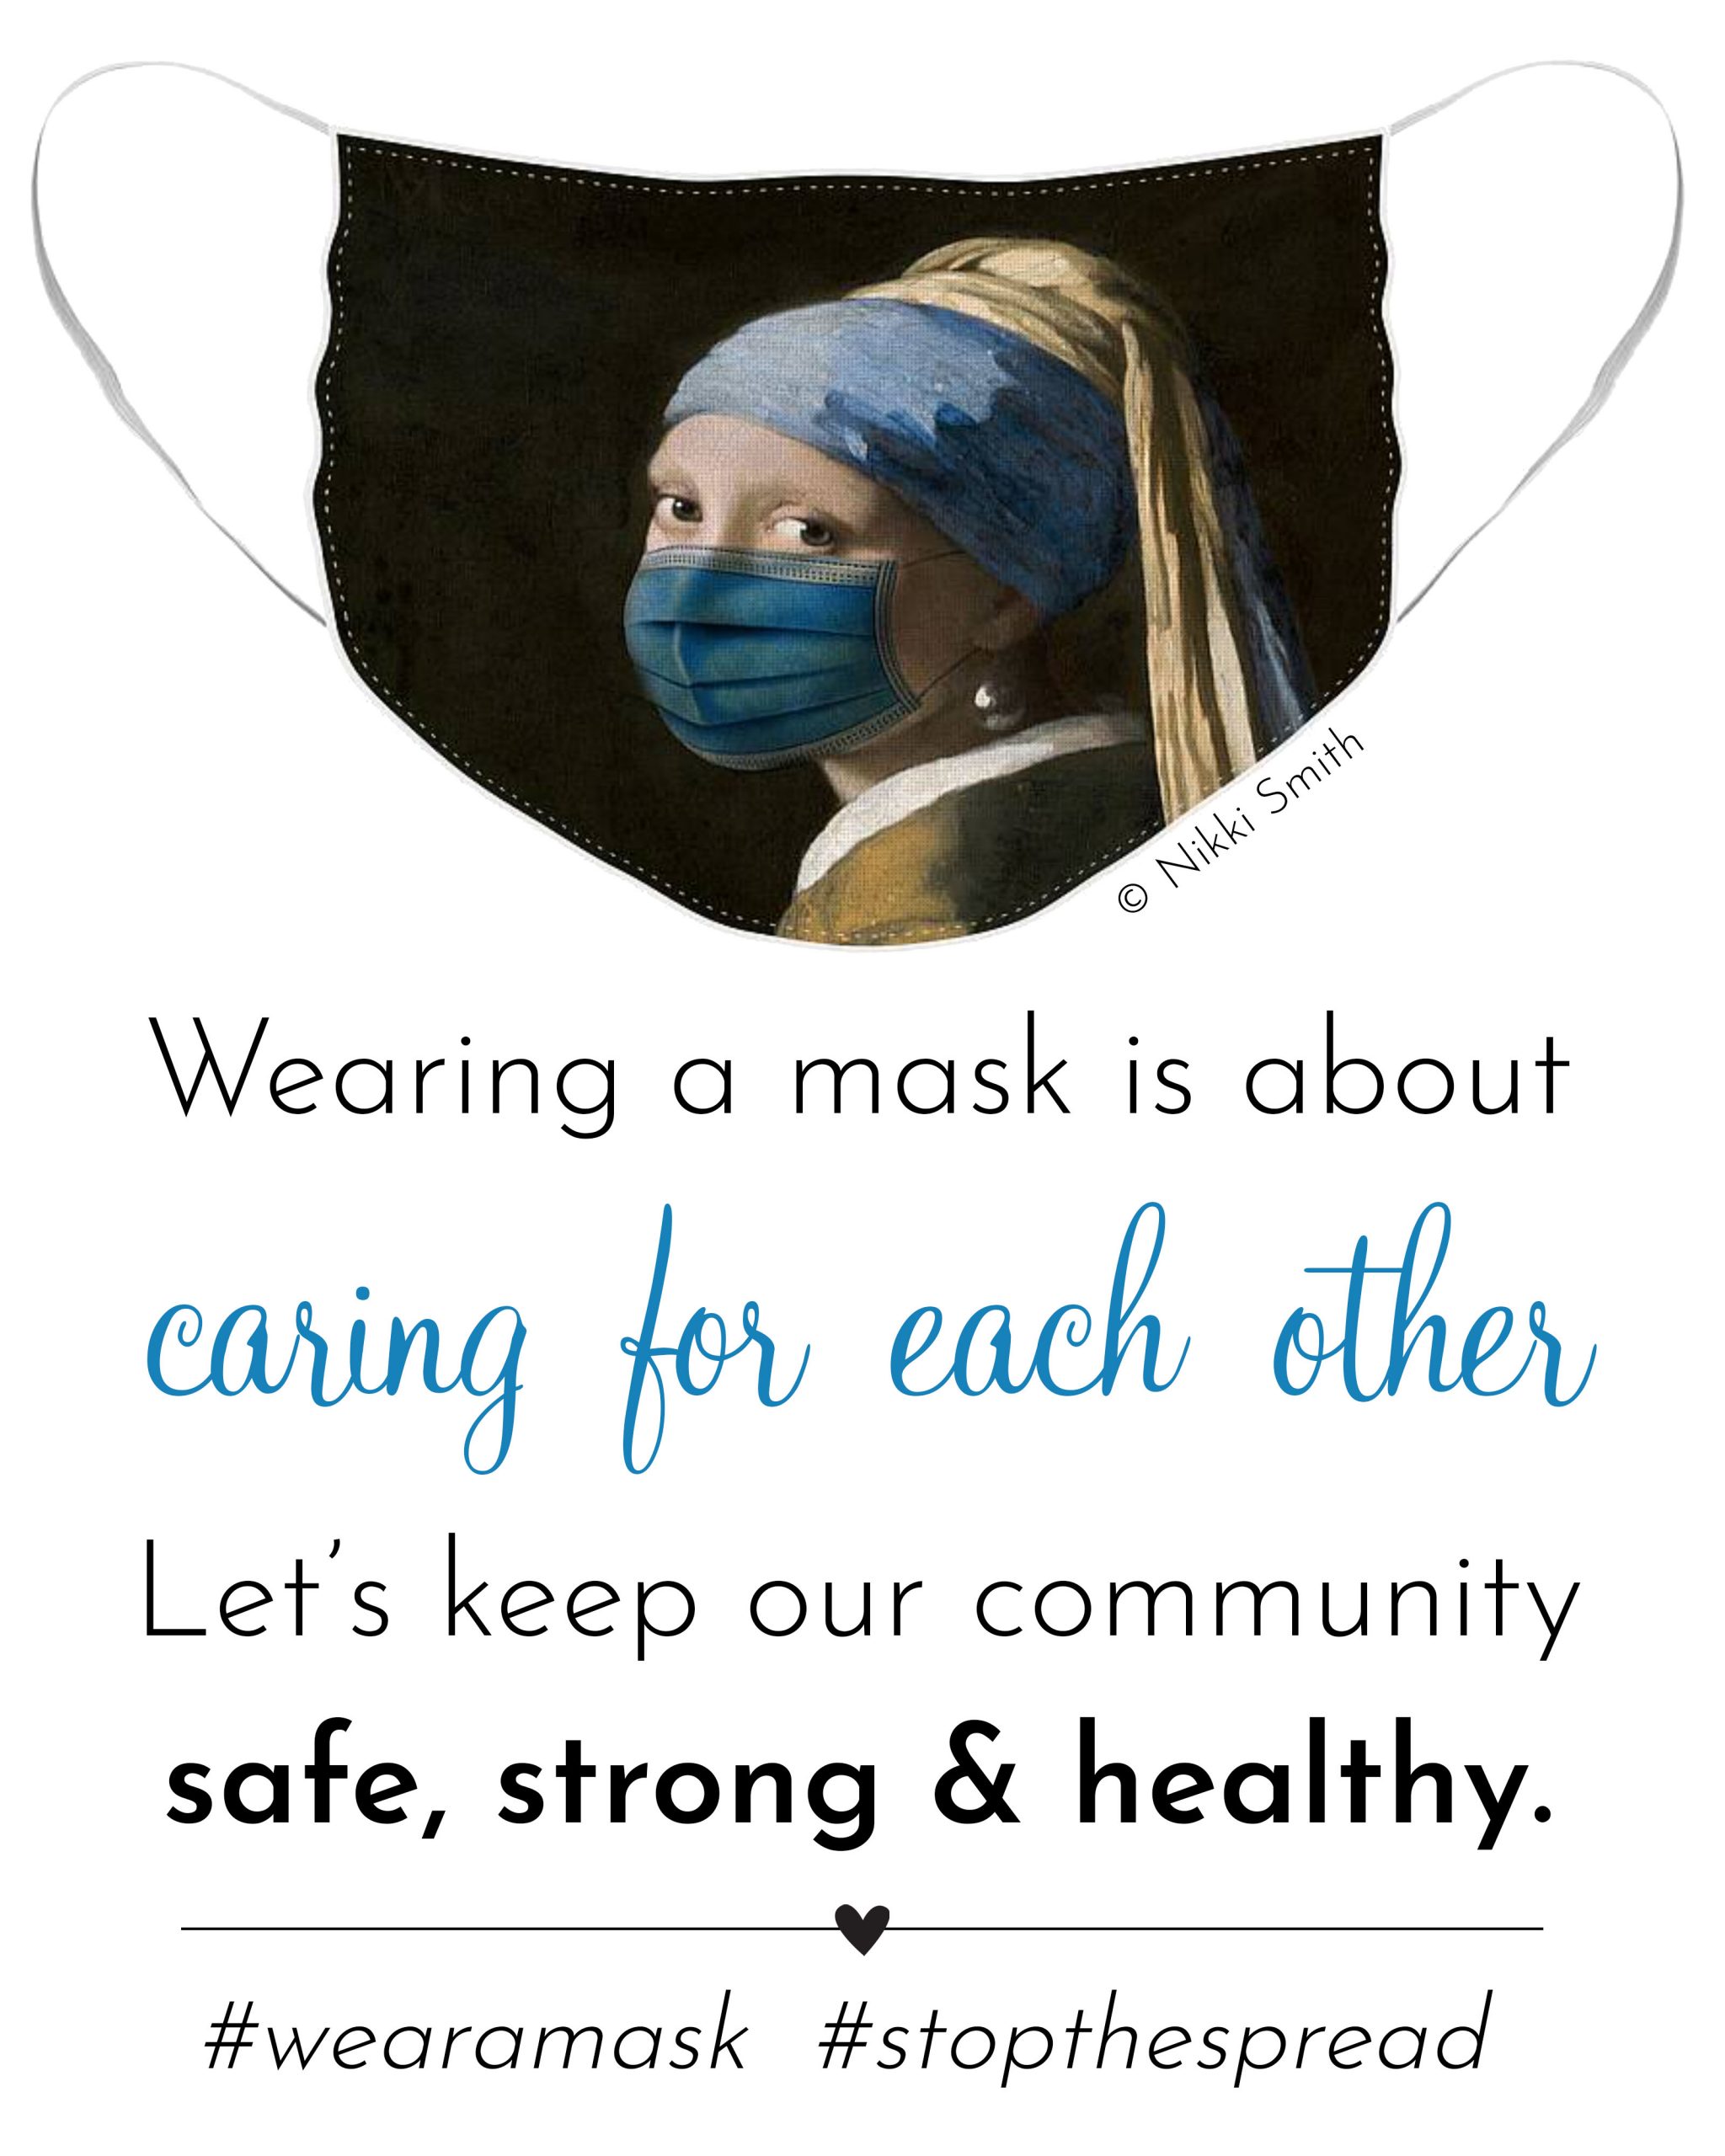 Wearing a mask is about caring for each other. Let's keep our community safe, strong and healthy. Artwork: Masked Girl with a Pearl Earring by Nikki Smith